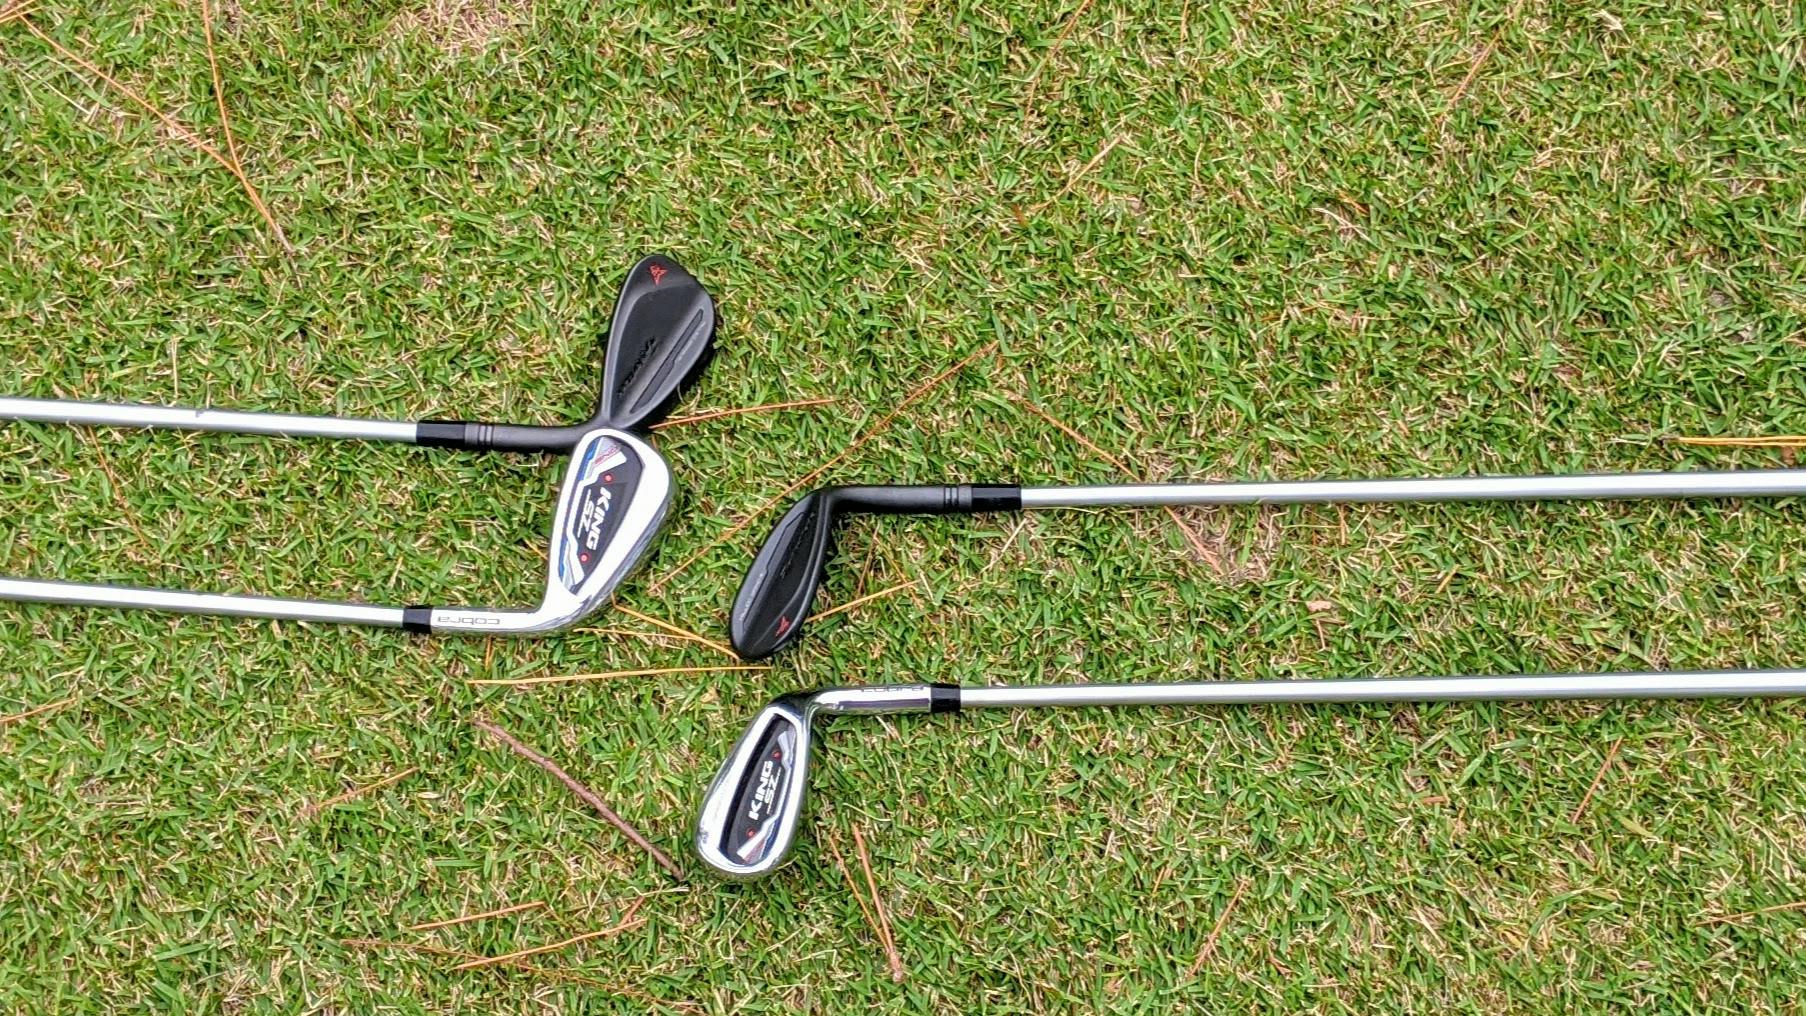 Four Cobra One-Length Irons laying in the grass